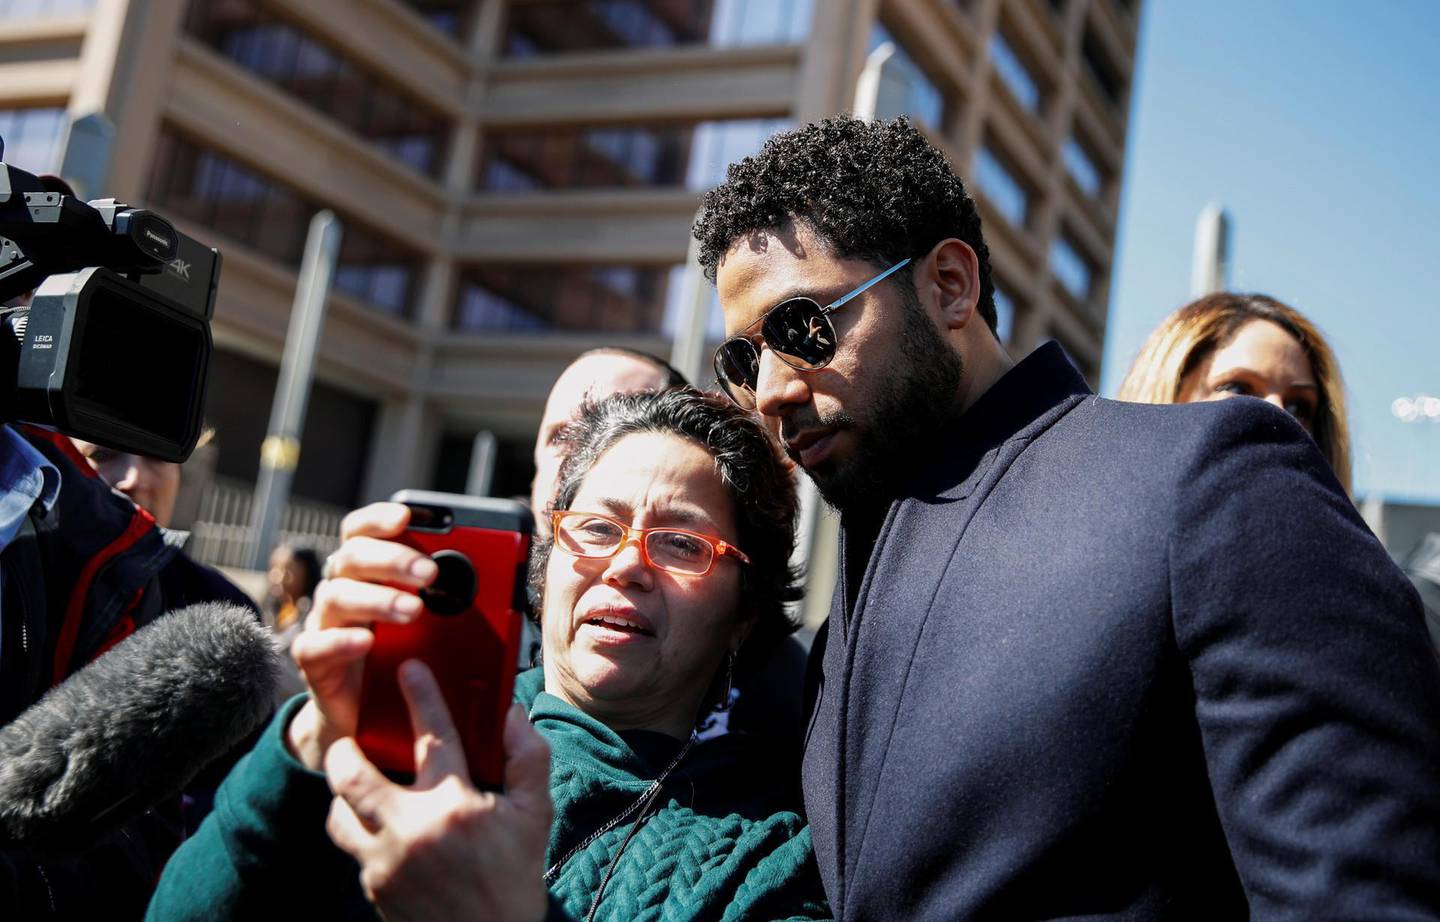 Actor Jussie Smollett poses for a picture with a fan as he leaves court after charges against him were dropped by state prosecutors in Chicago, Illinois, U.S. March 26, 2019. REUTERS/Kamil Krzaczynski